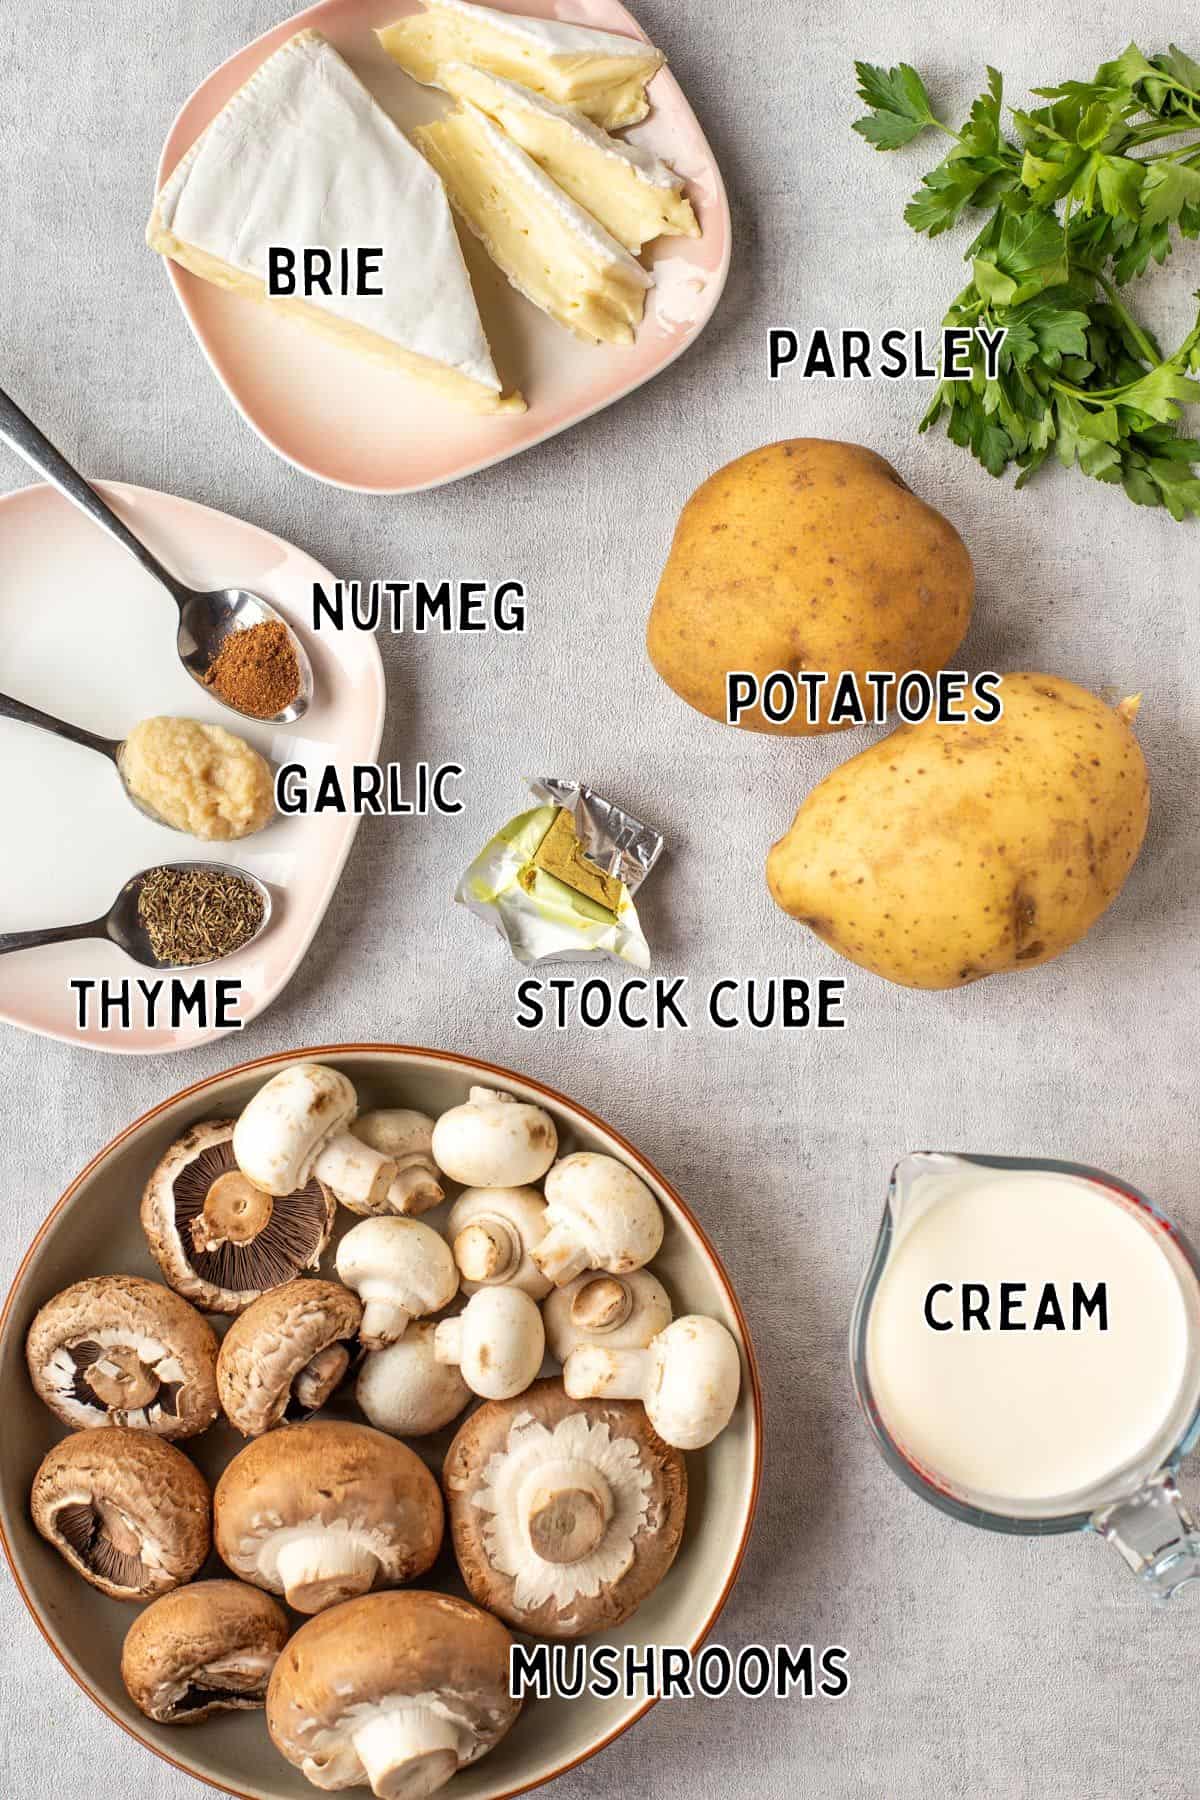 Ingredients for mushroom and potato gratin with text overlay.